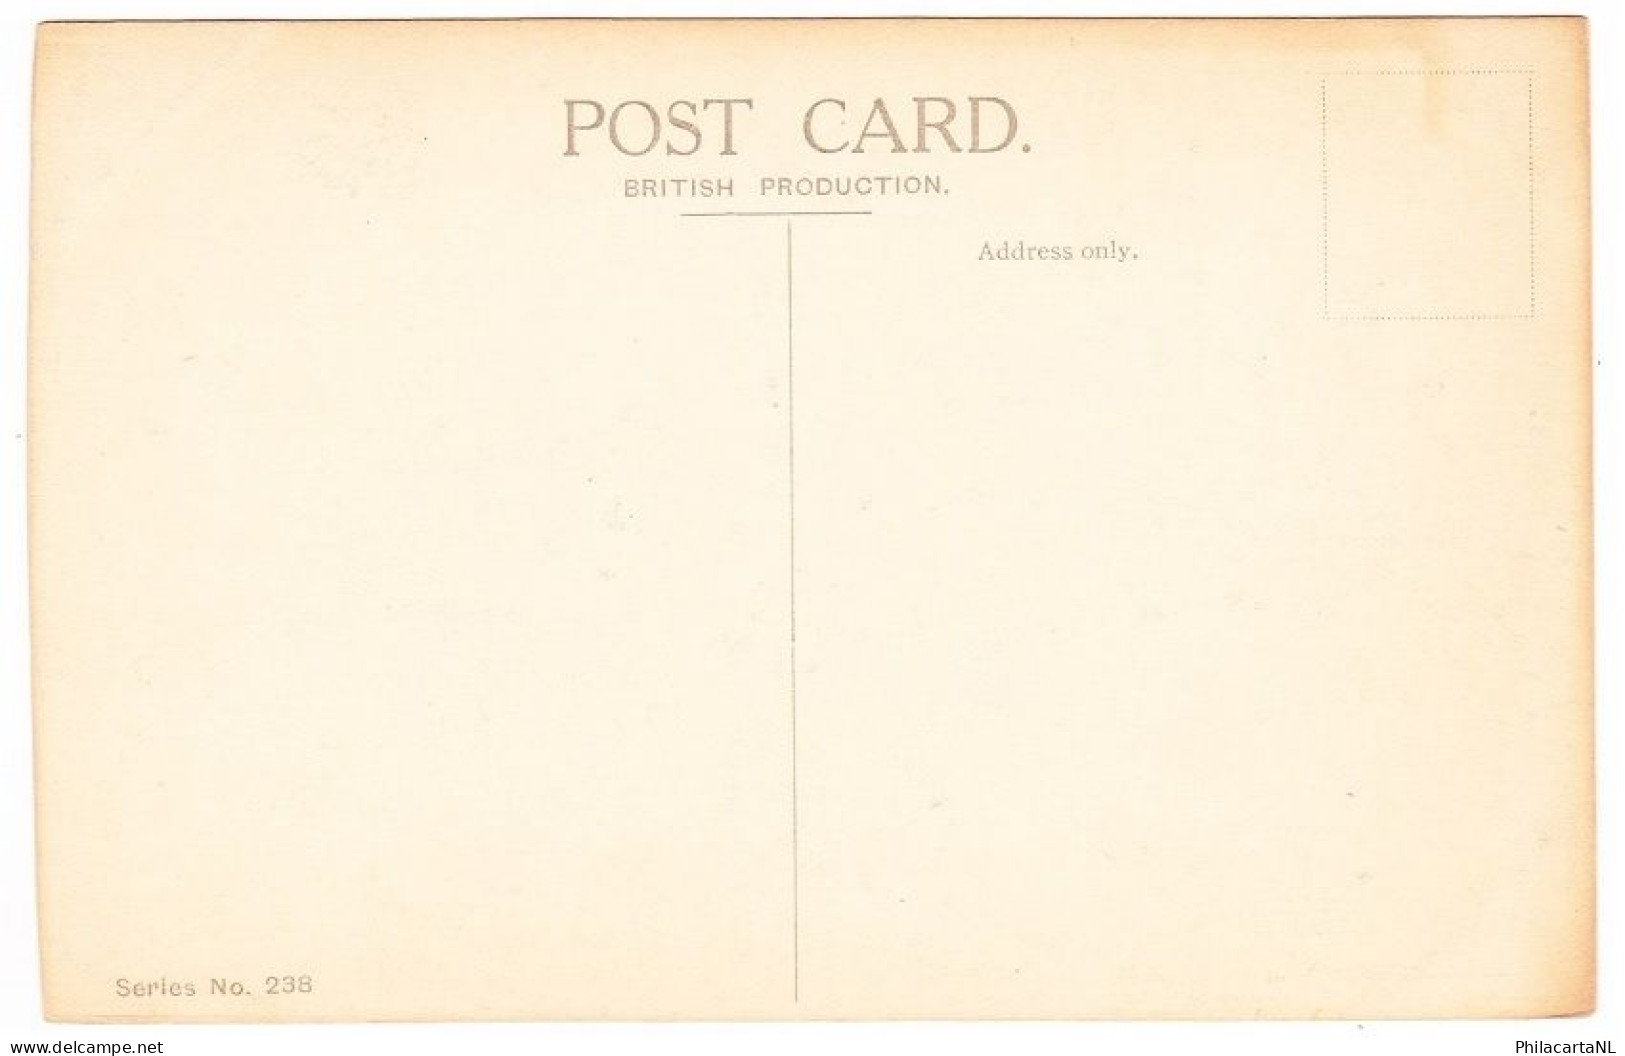 London - Westminster Abbey - Right Side Of The Card Is Cut Askew. - Westminster Abbey